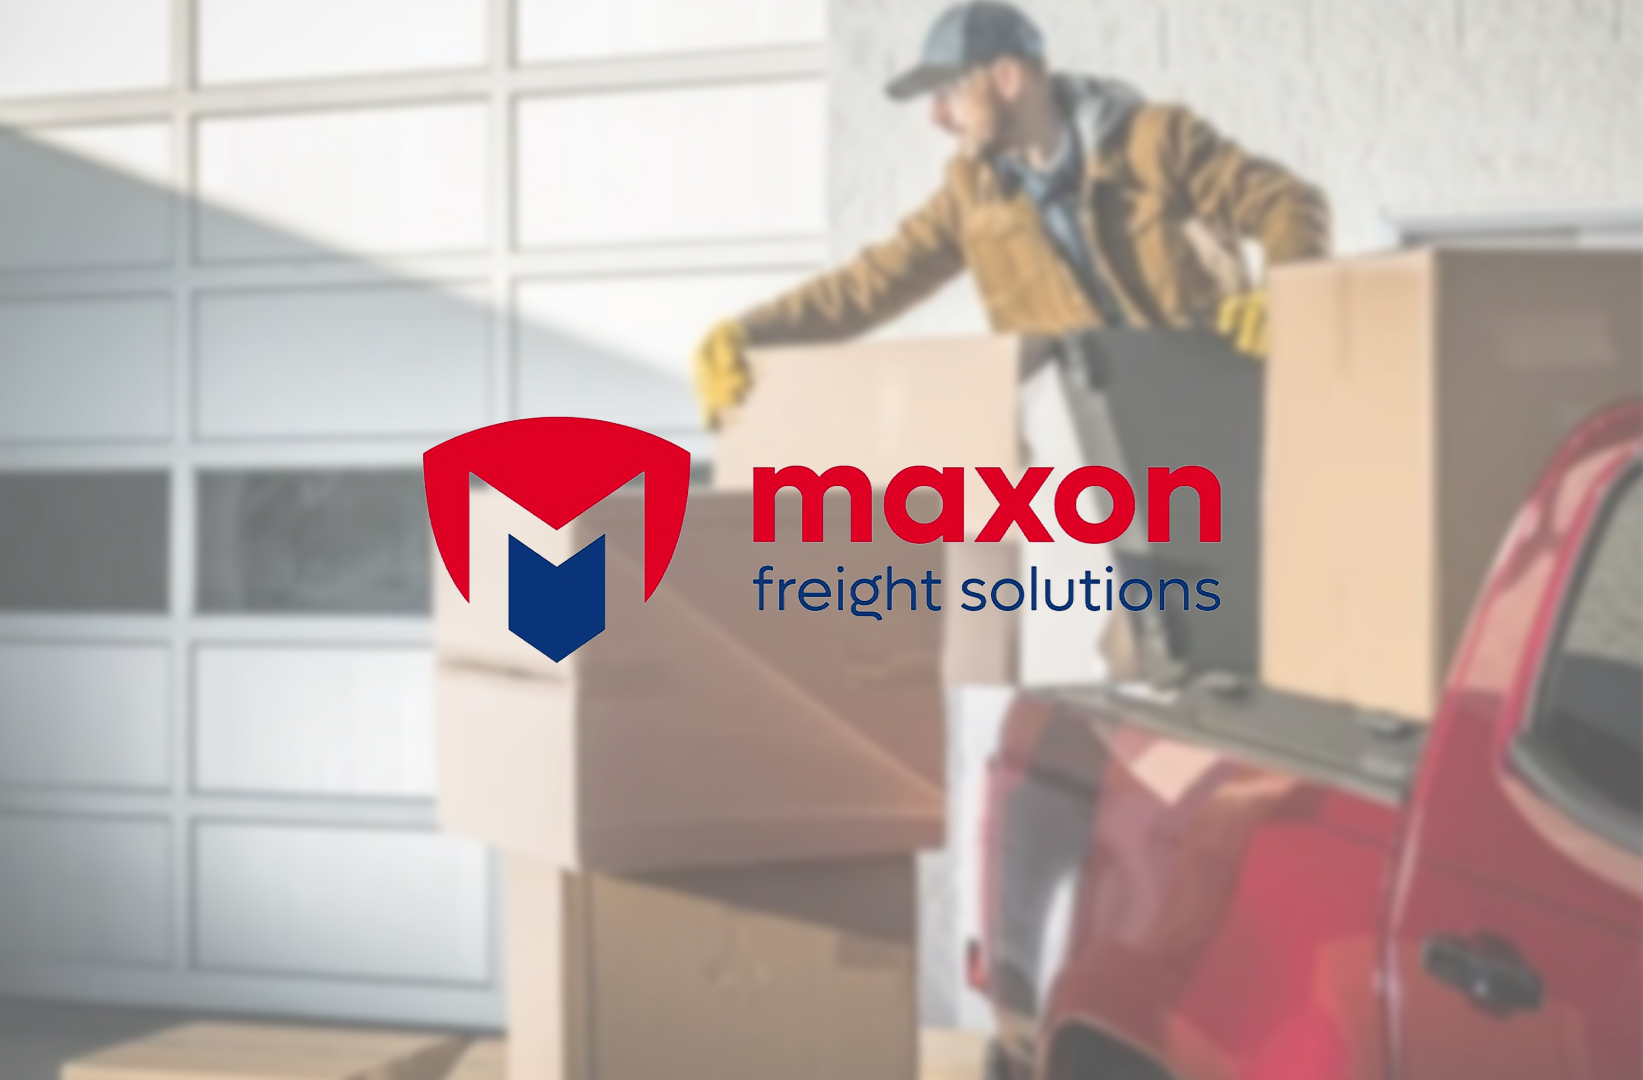 Maxon Freight Solutions, Odoo ERP Success, Case Study Logistics, ERP Implementation Journey, Freight Management Solutions, Successful Odoo Deployment, Logistics Efficiency Improvement, Freight Operations Optimization, Odoo ERP Impact, Logistics Industry Solutions